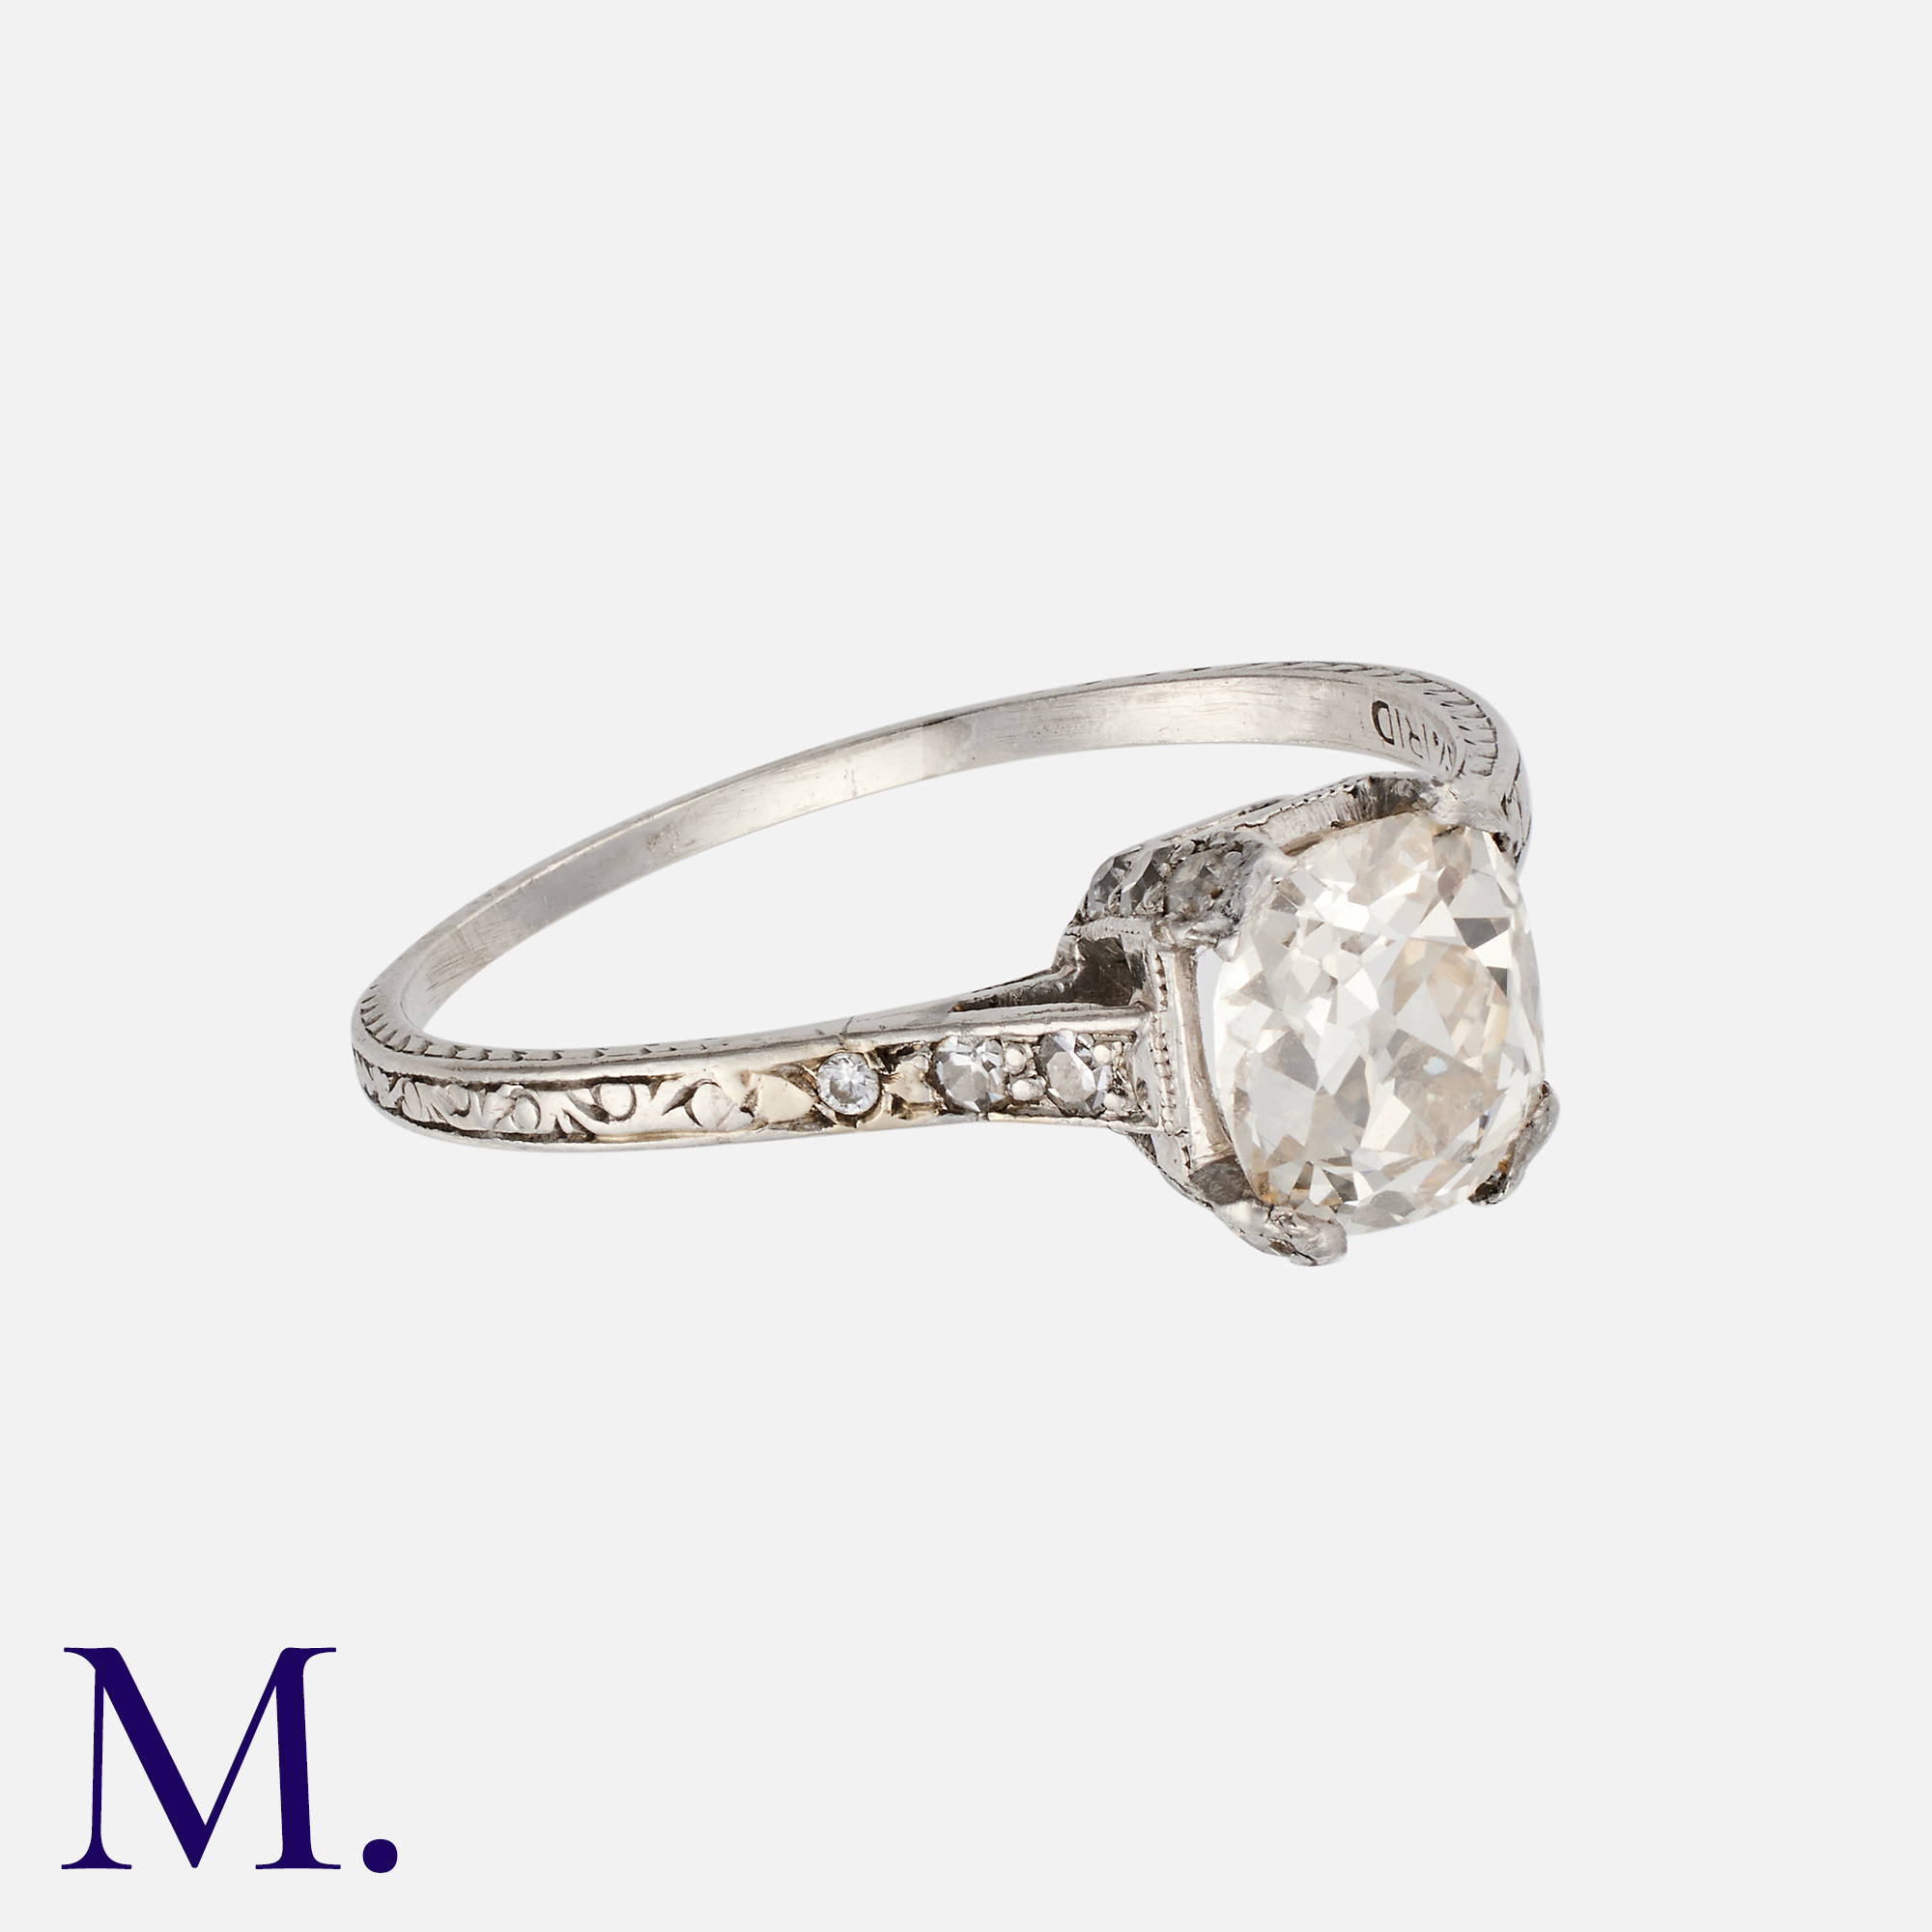 An Old Cut Diamond Ring in platinum and 5% iridium, set with a principal old cut diamond of - Image 2 of 2